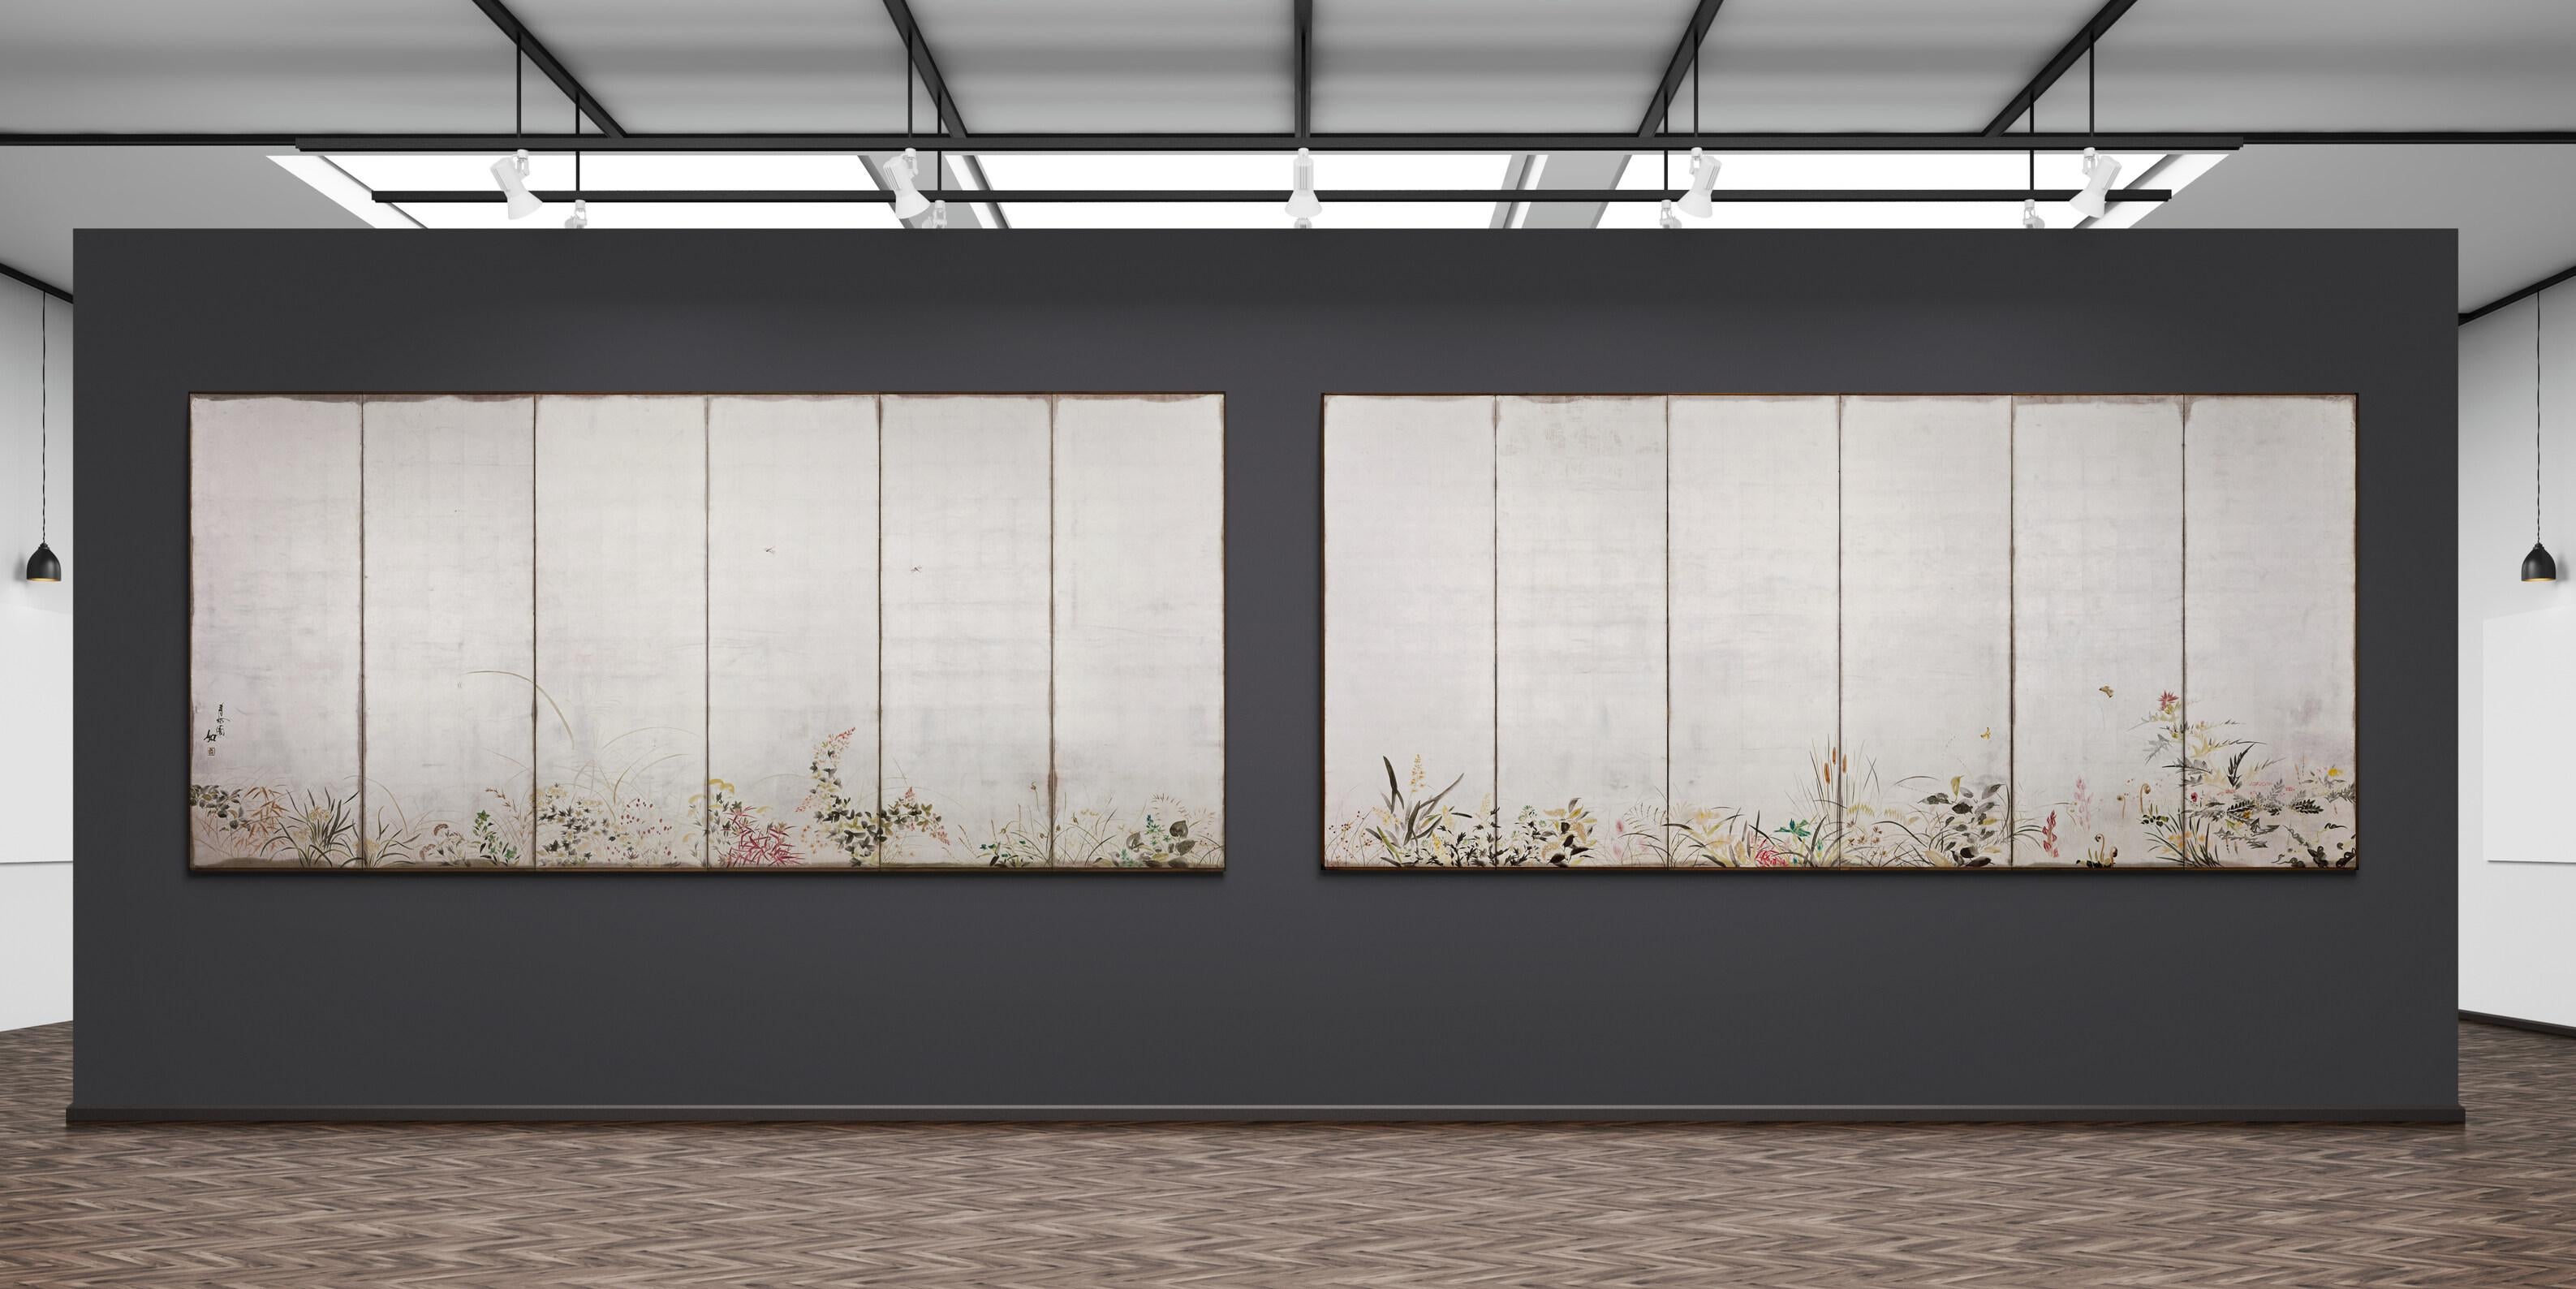 Flowers of the four seasons

Isoi Joshin (1883-1964)

Pair of six-panel Japanese screens

Ink, pigment, lacquer and silver leaf on paper

Inscription: Isoi Jo

Seal: Shin

Dimensions:

Each screen: : W. 379 cm x H. 175.5 cm (149” x